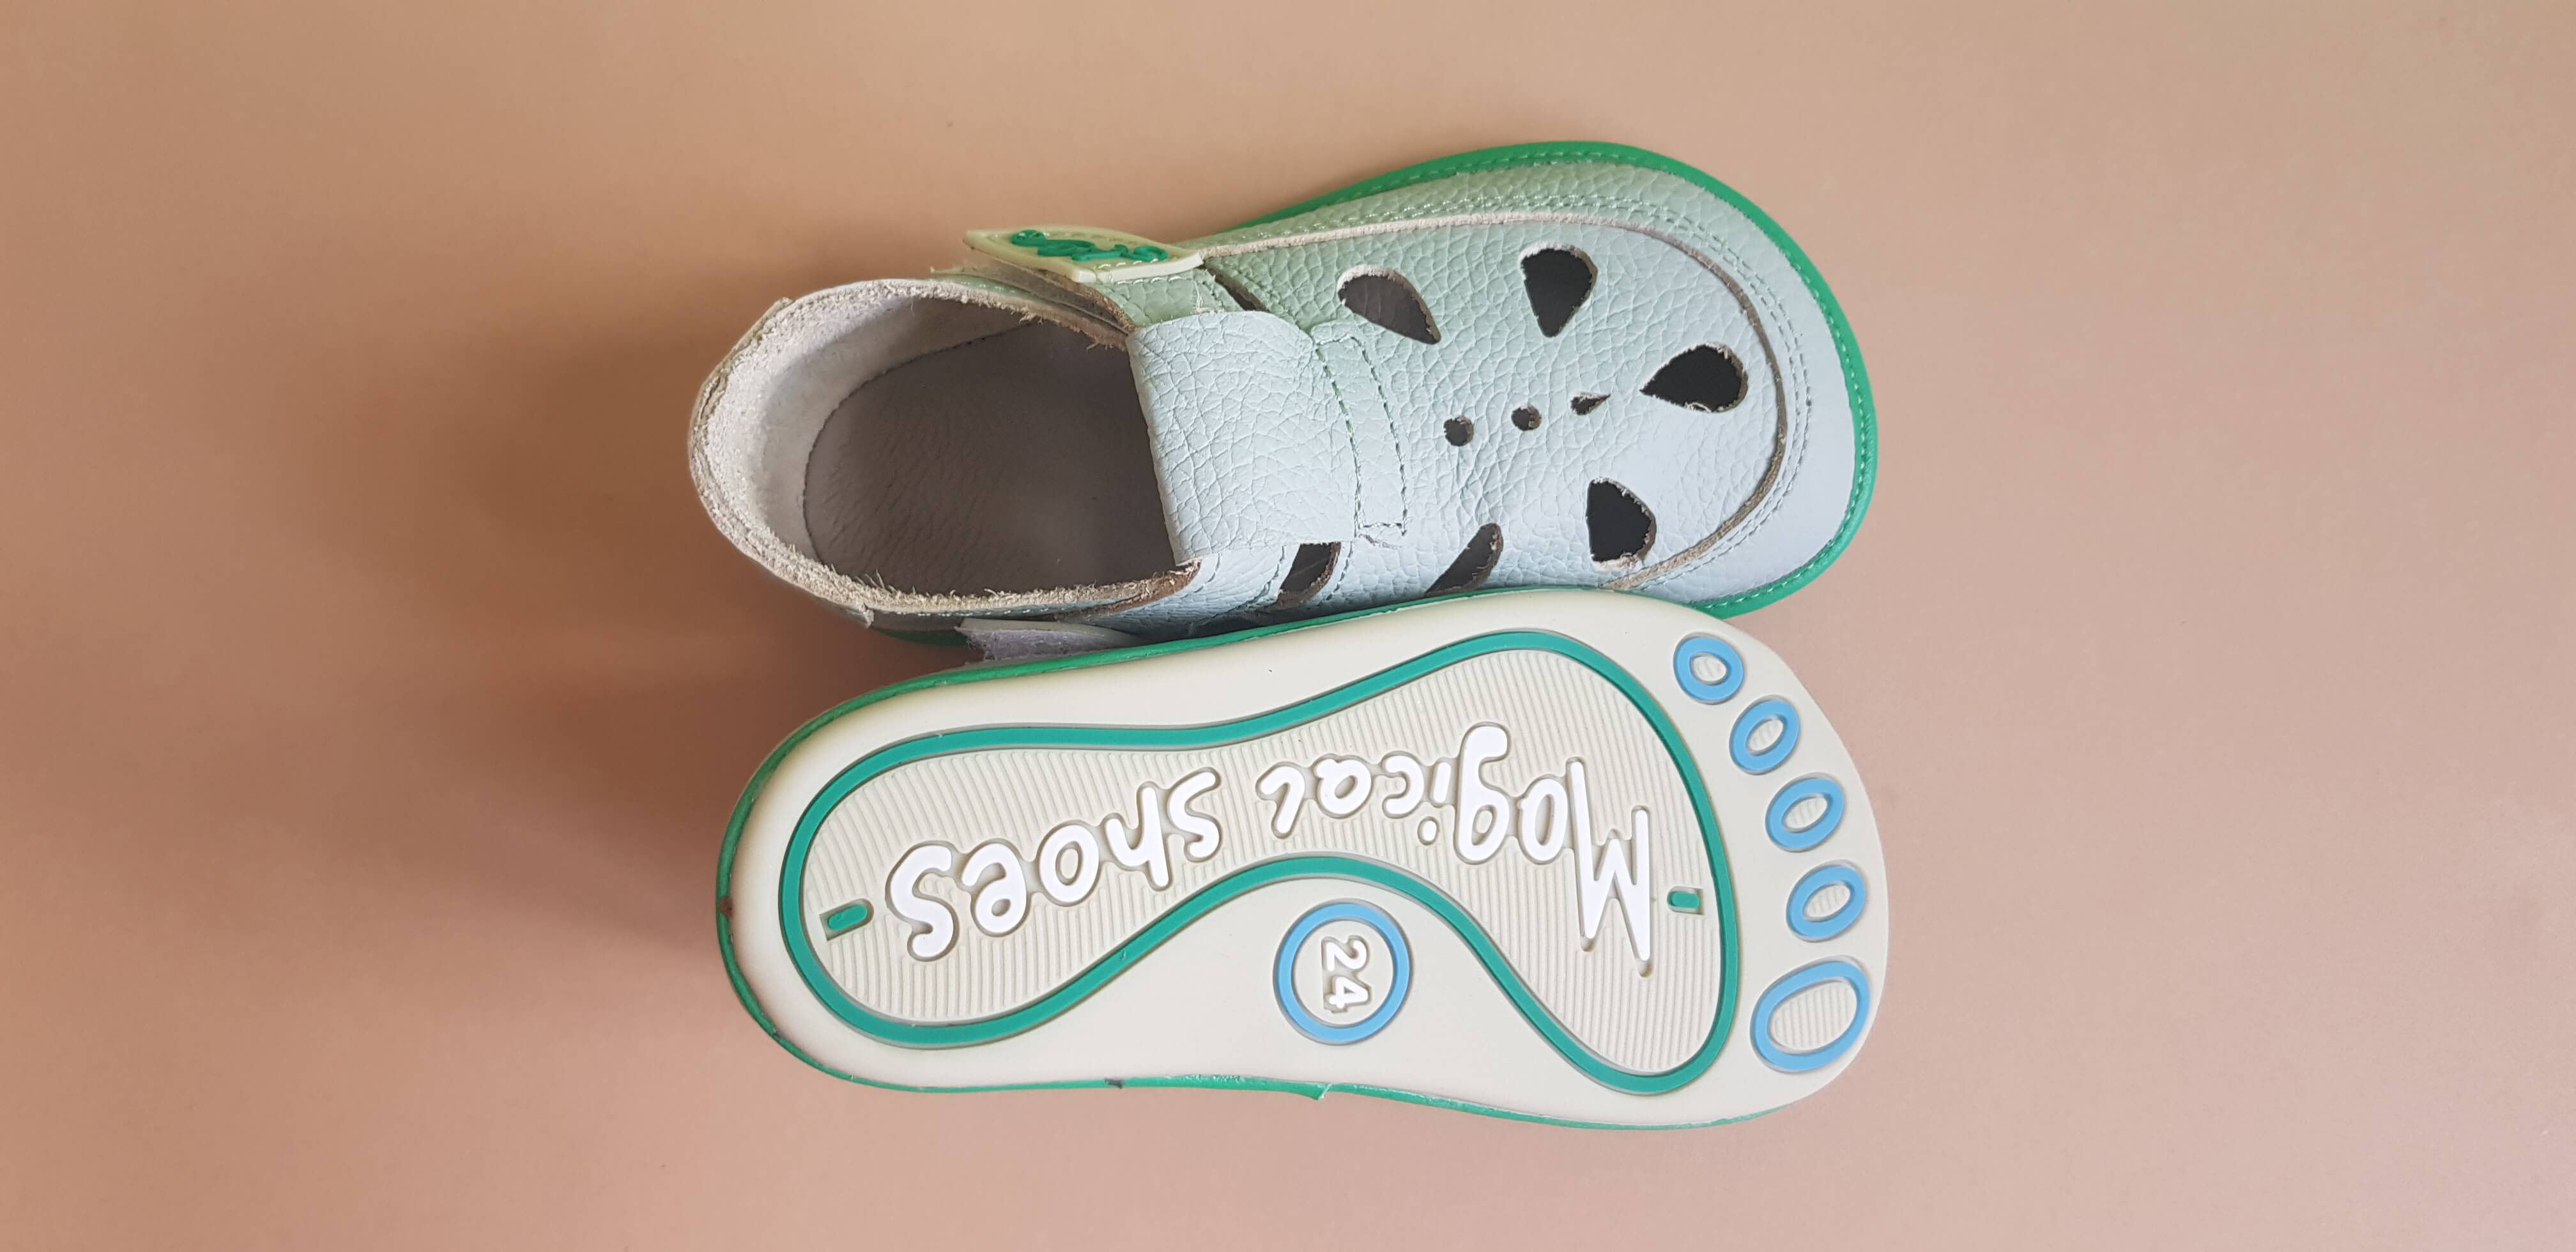 Magical shoes sandals - Mint with green lining